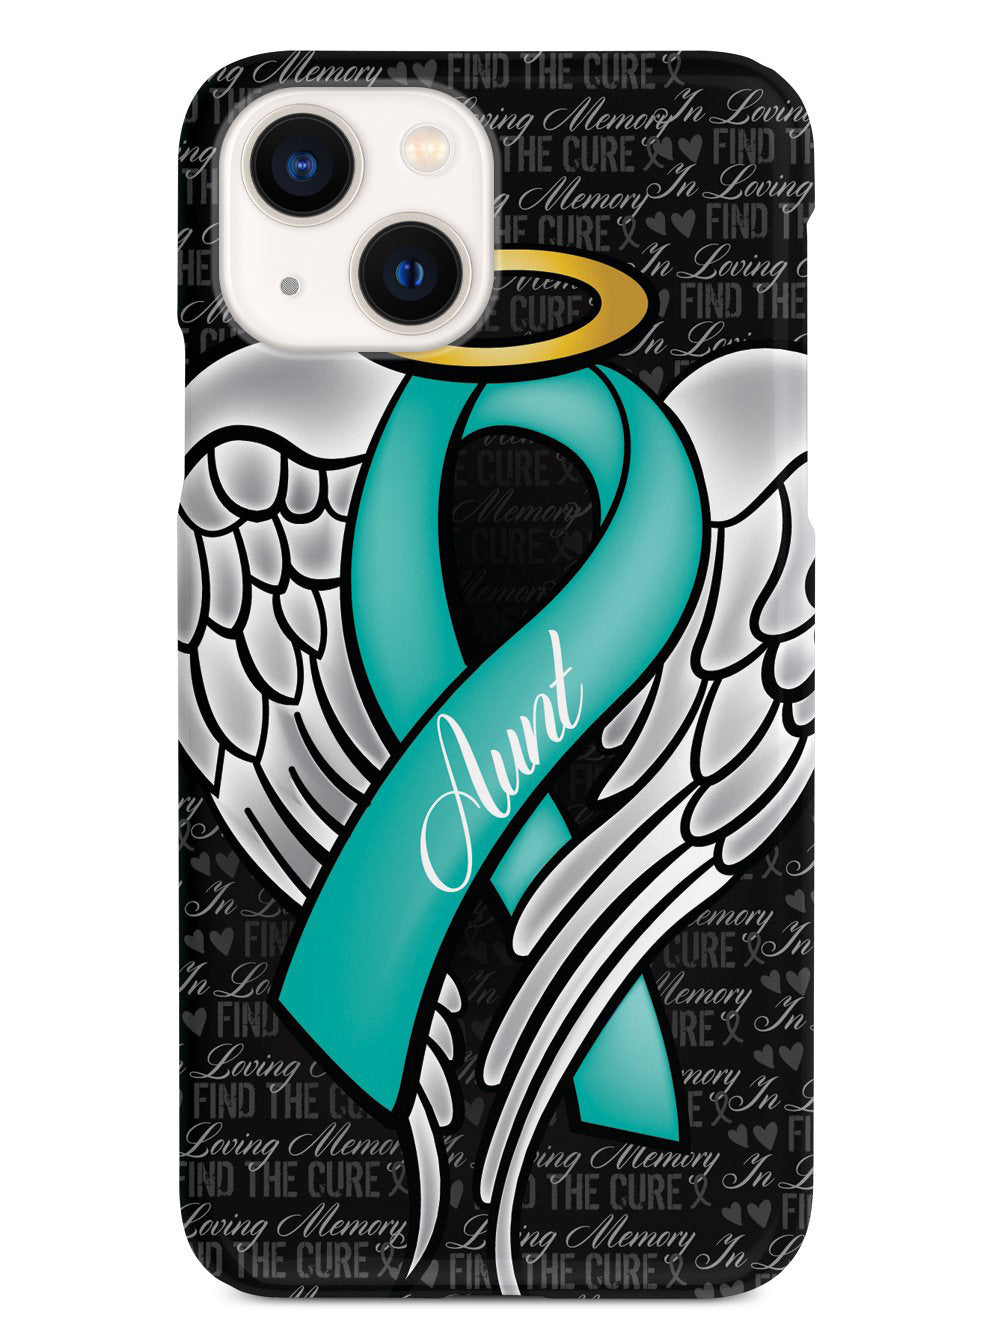 In Loving Memory of My Aunt - Teal Ribbon Case